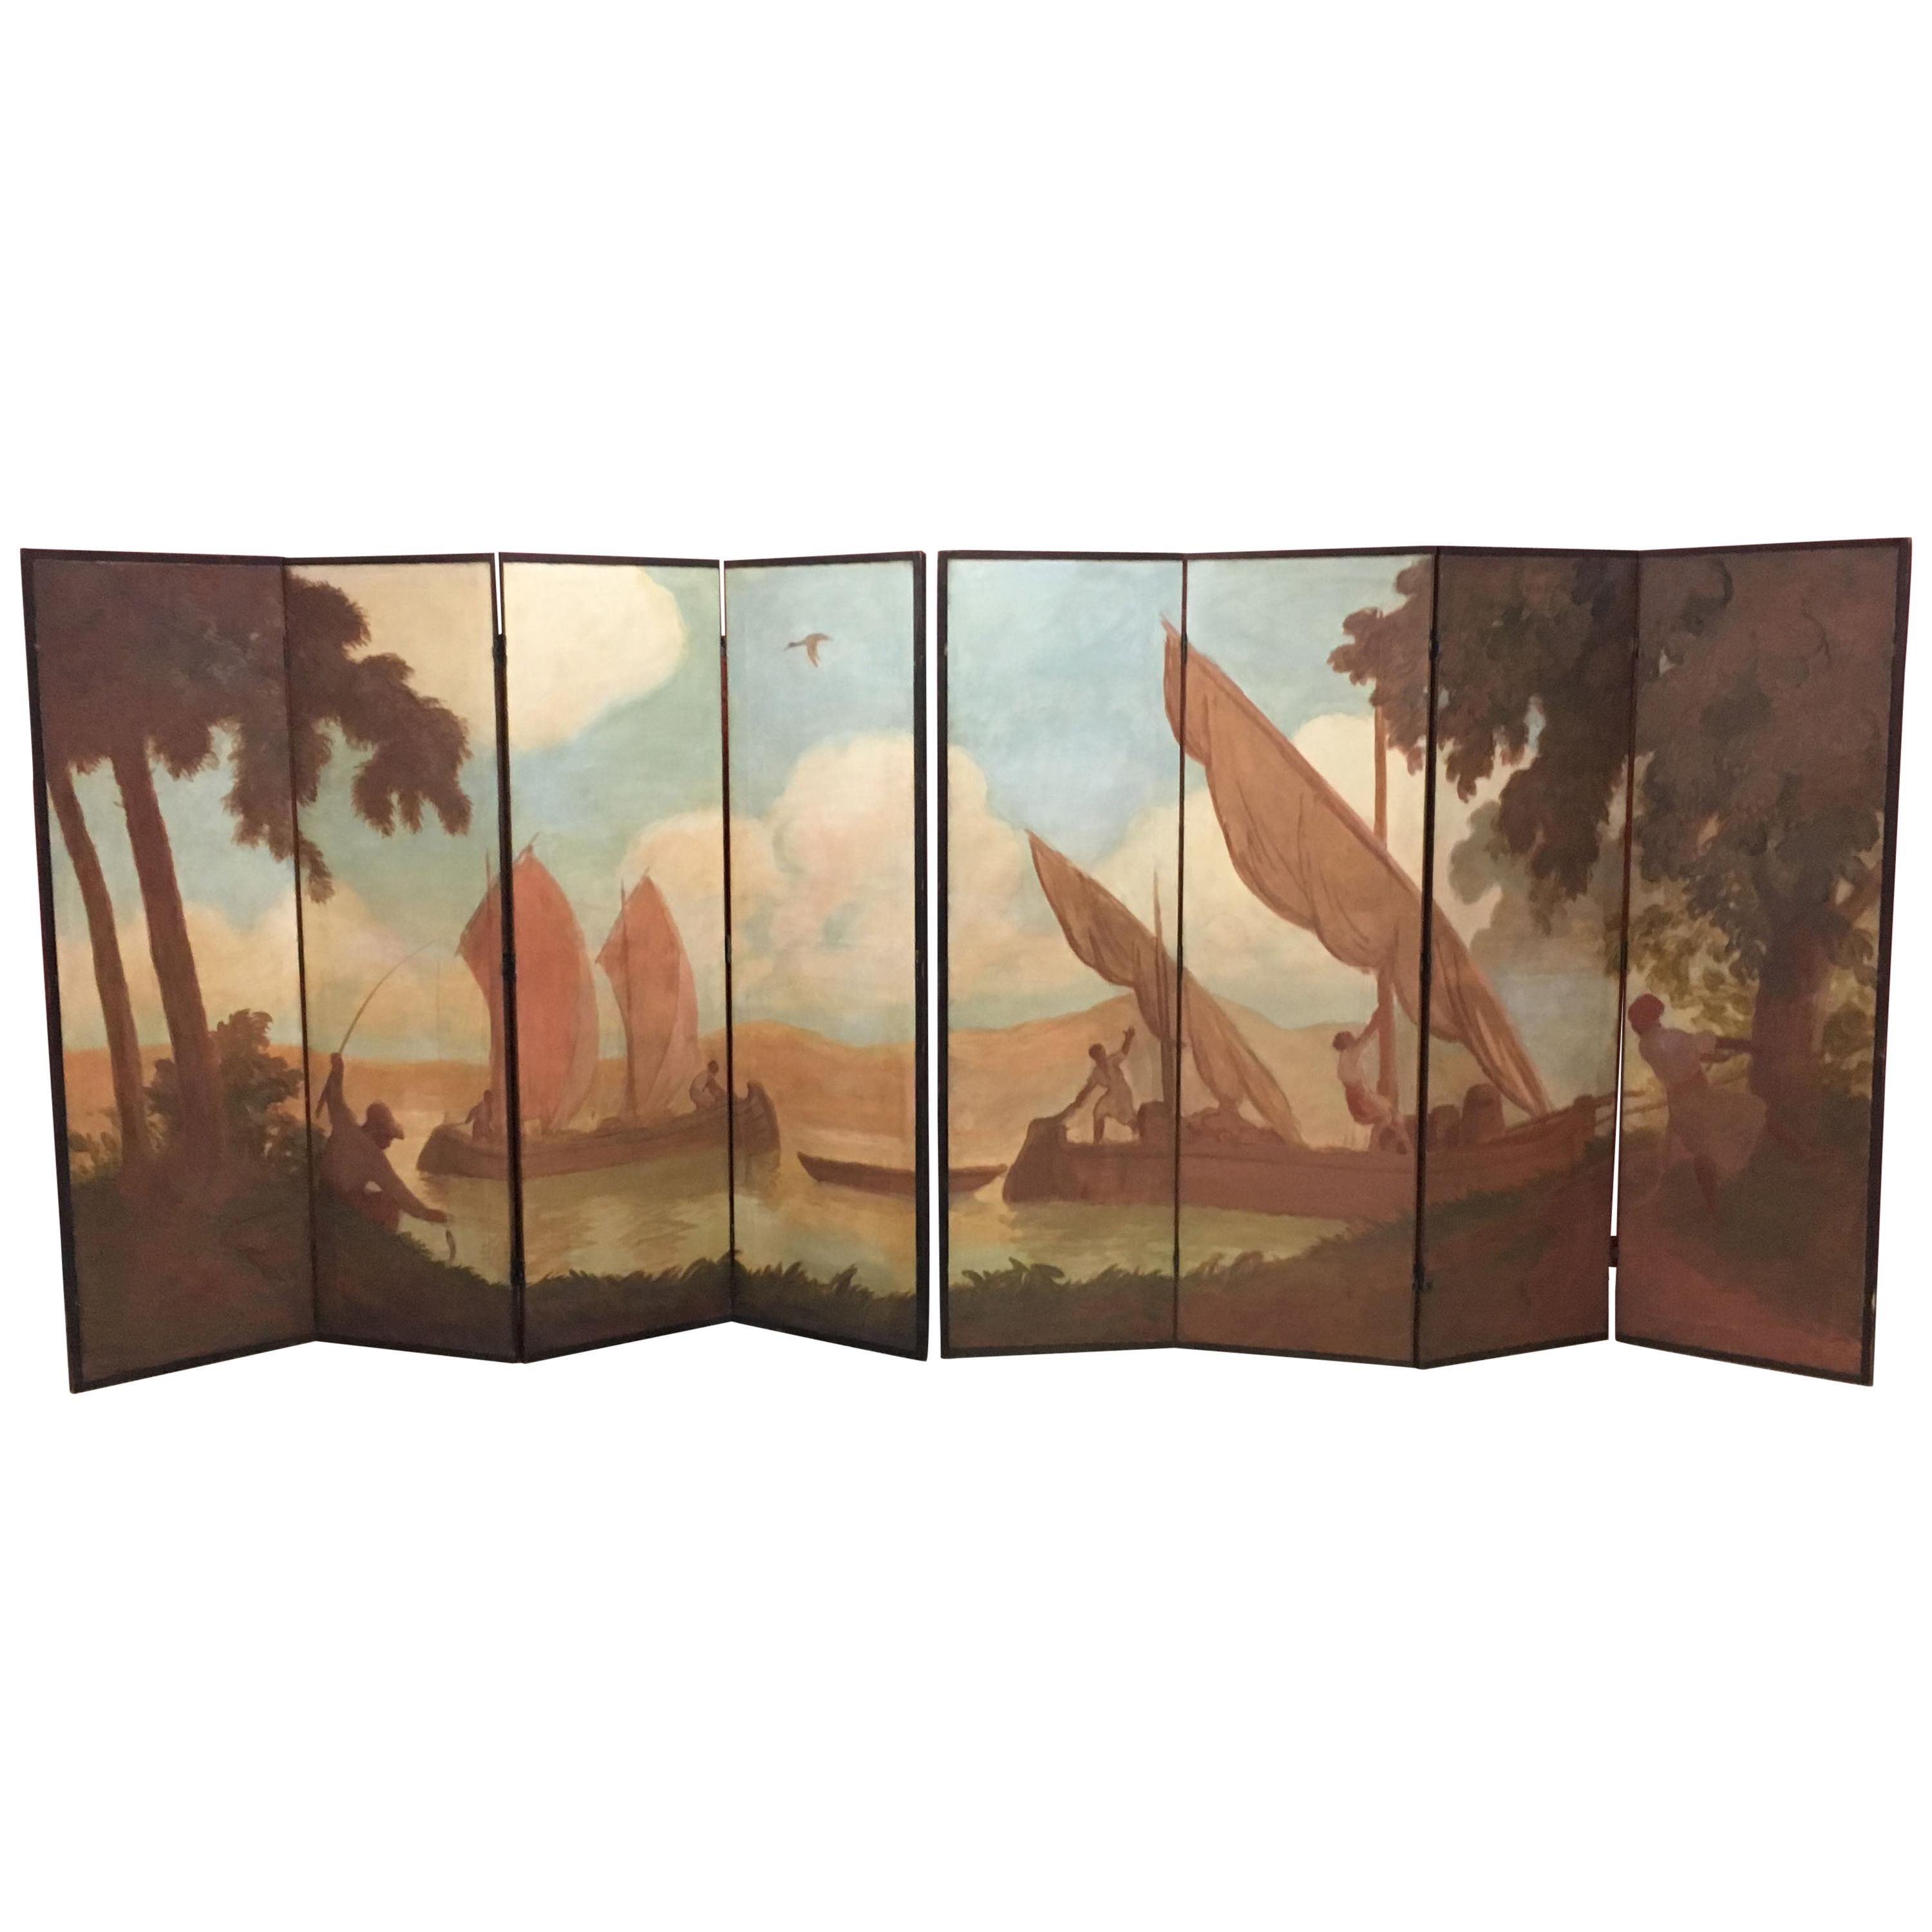 Rare Folding Screen Period 1900, Composed of Two Elements, circa 1900 For Sale